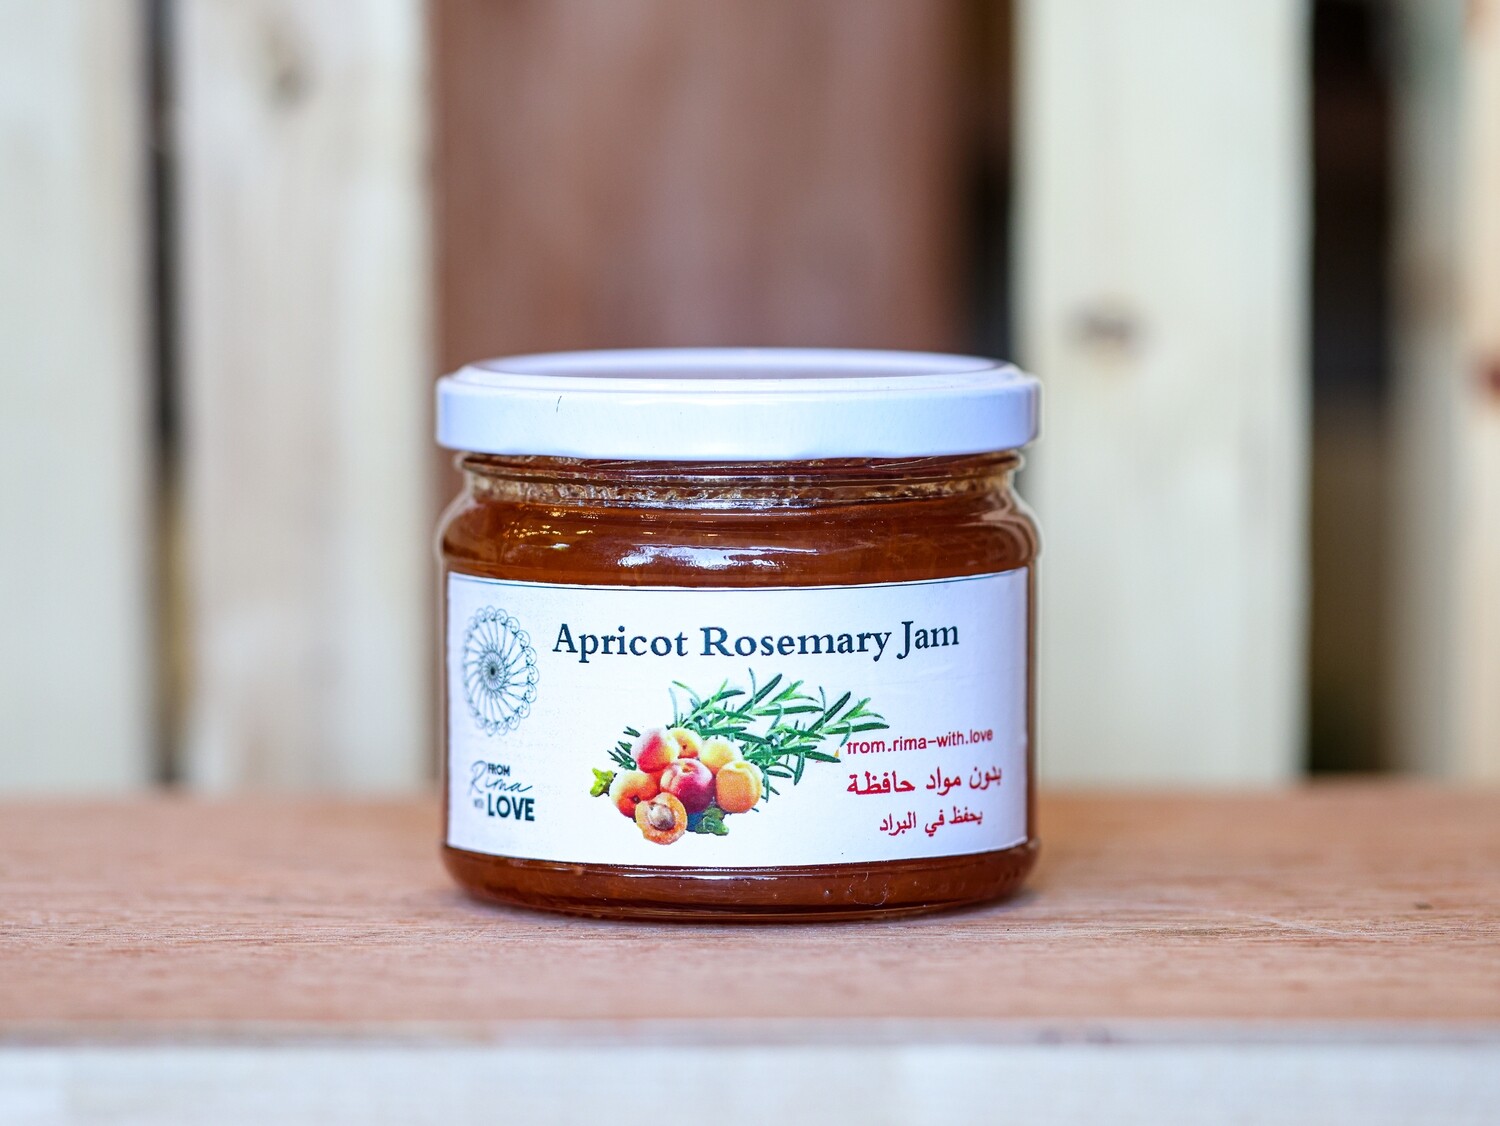 Apricot Rosemary Jam (Jar) - From Rima with Love